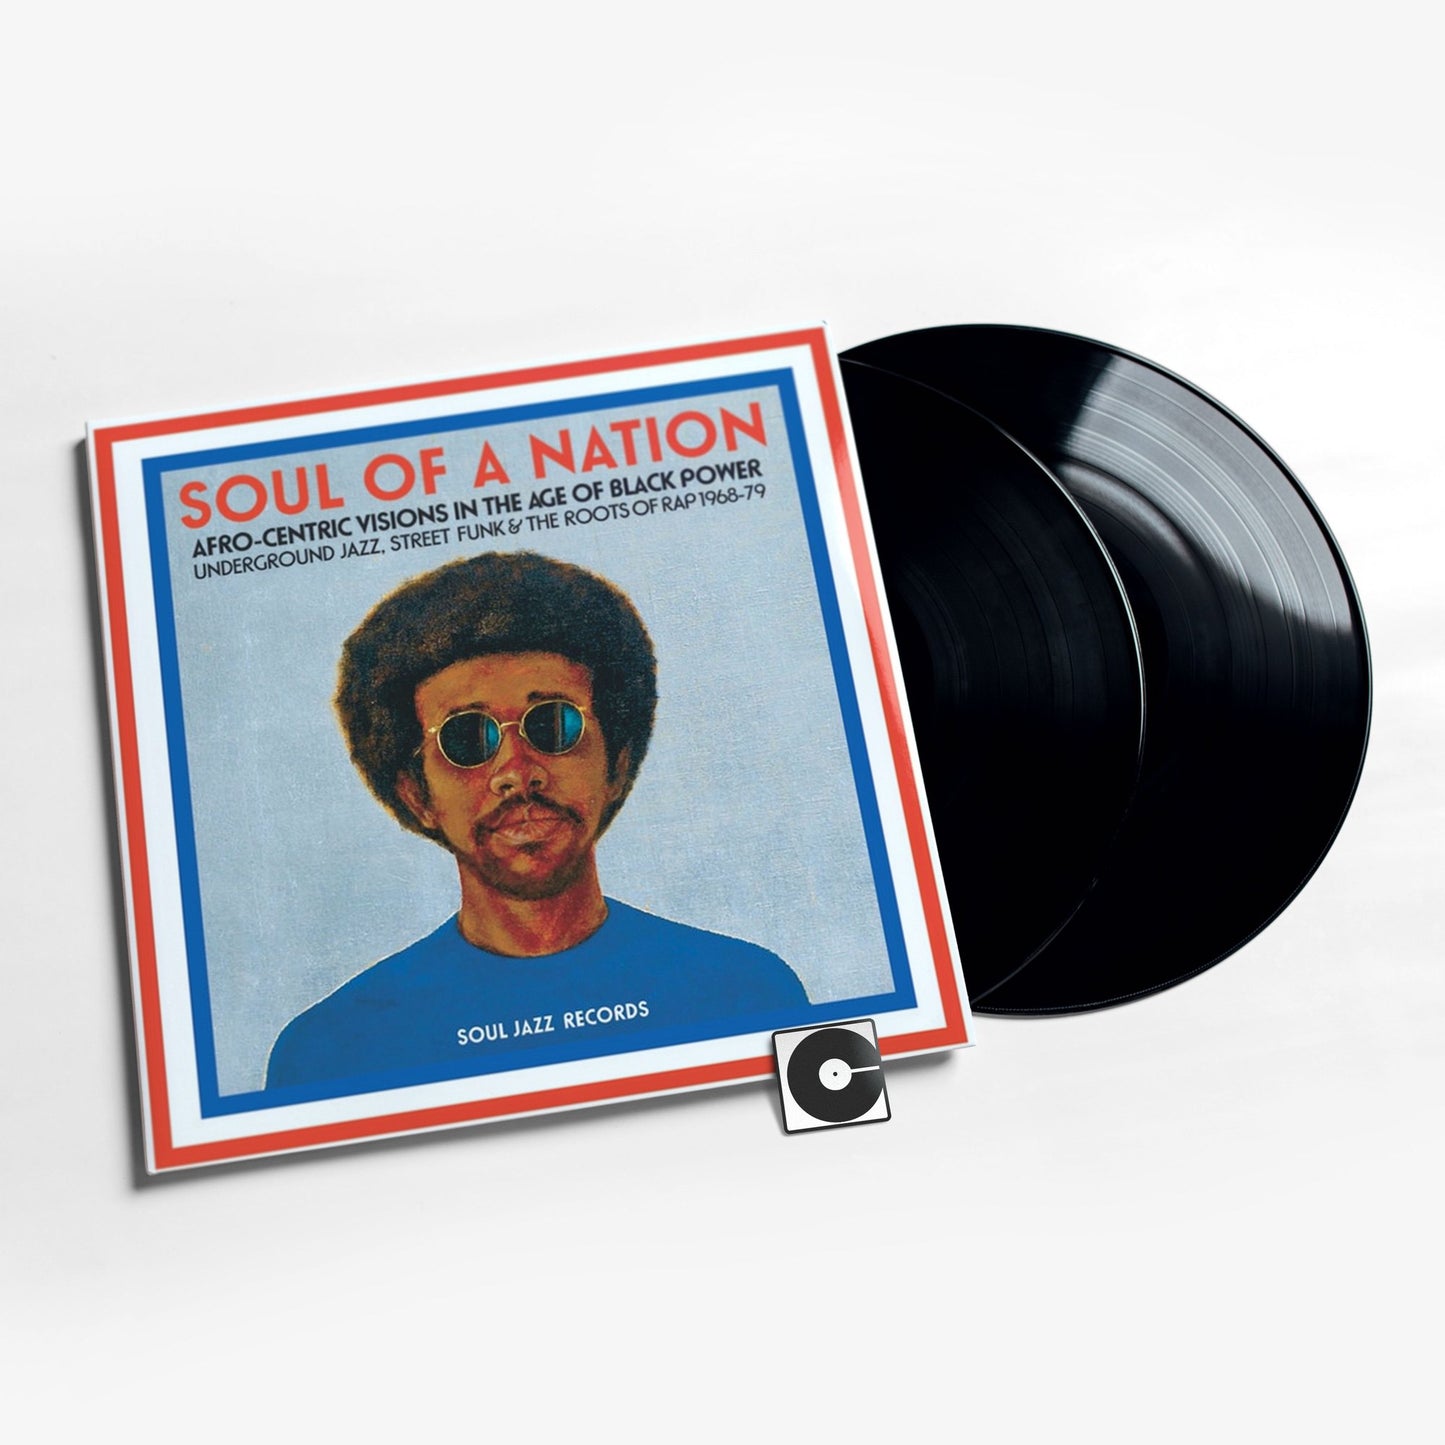 Soul Jazz Records Presents - "Soul Of A Nation: Afro-Centric Visions In The Age Of Black Power"